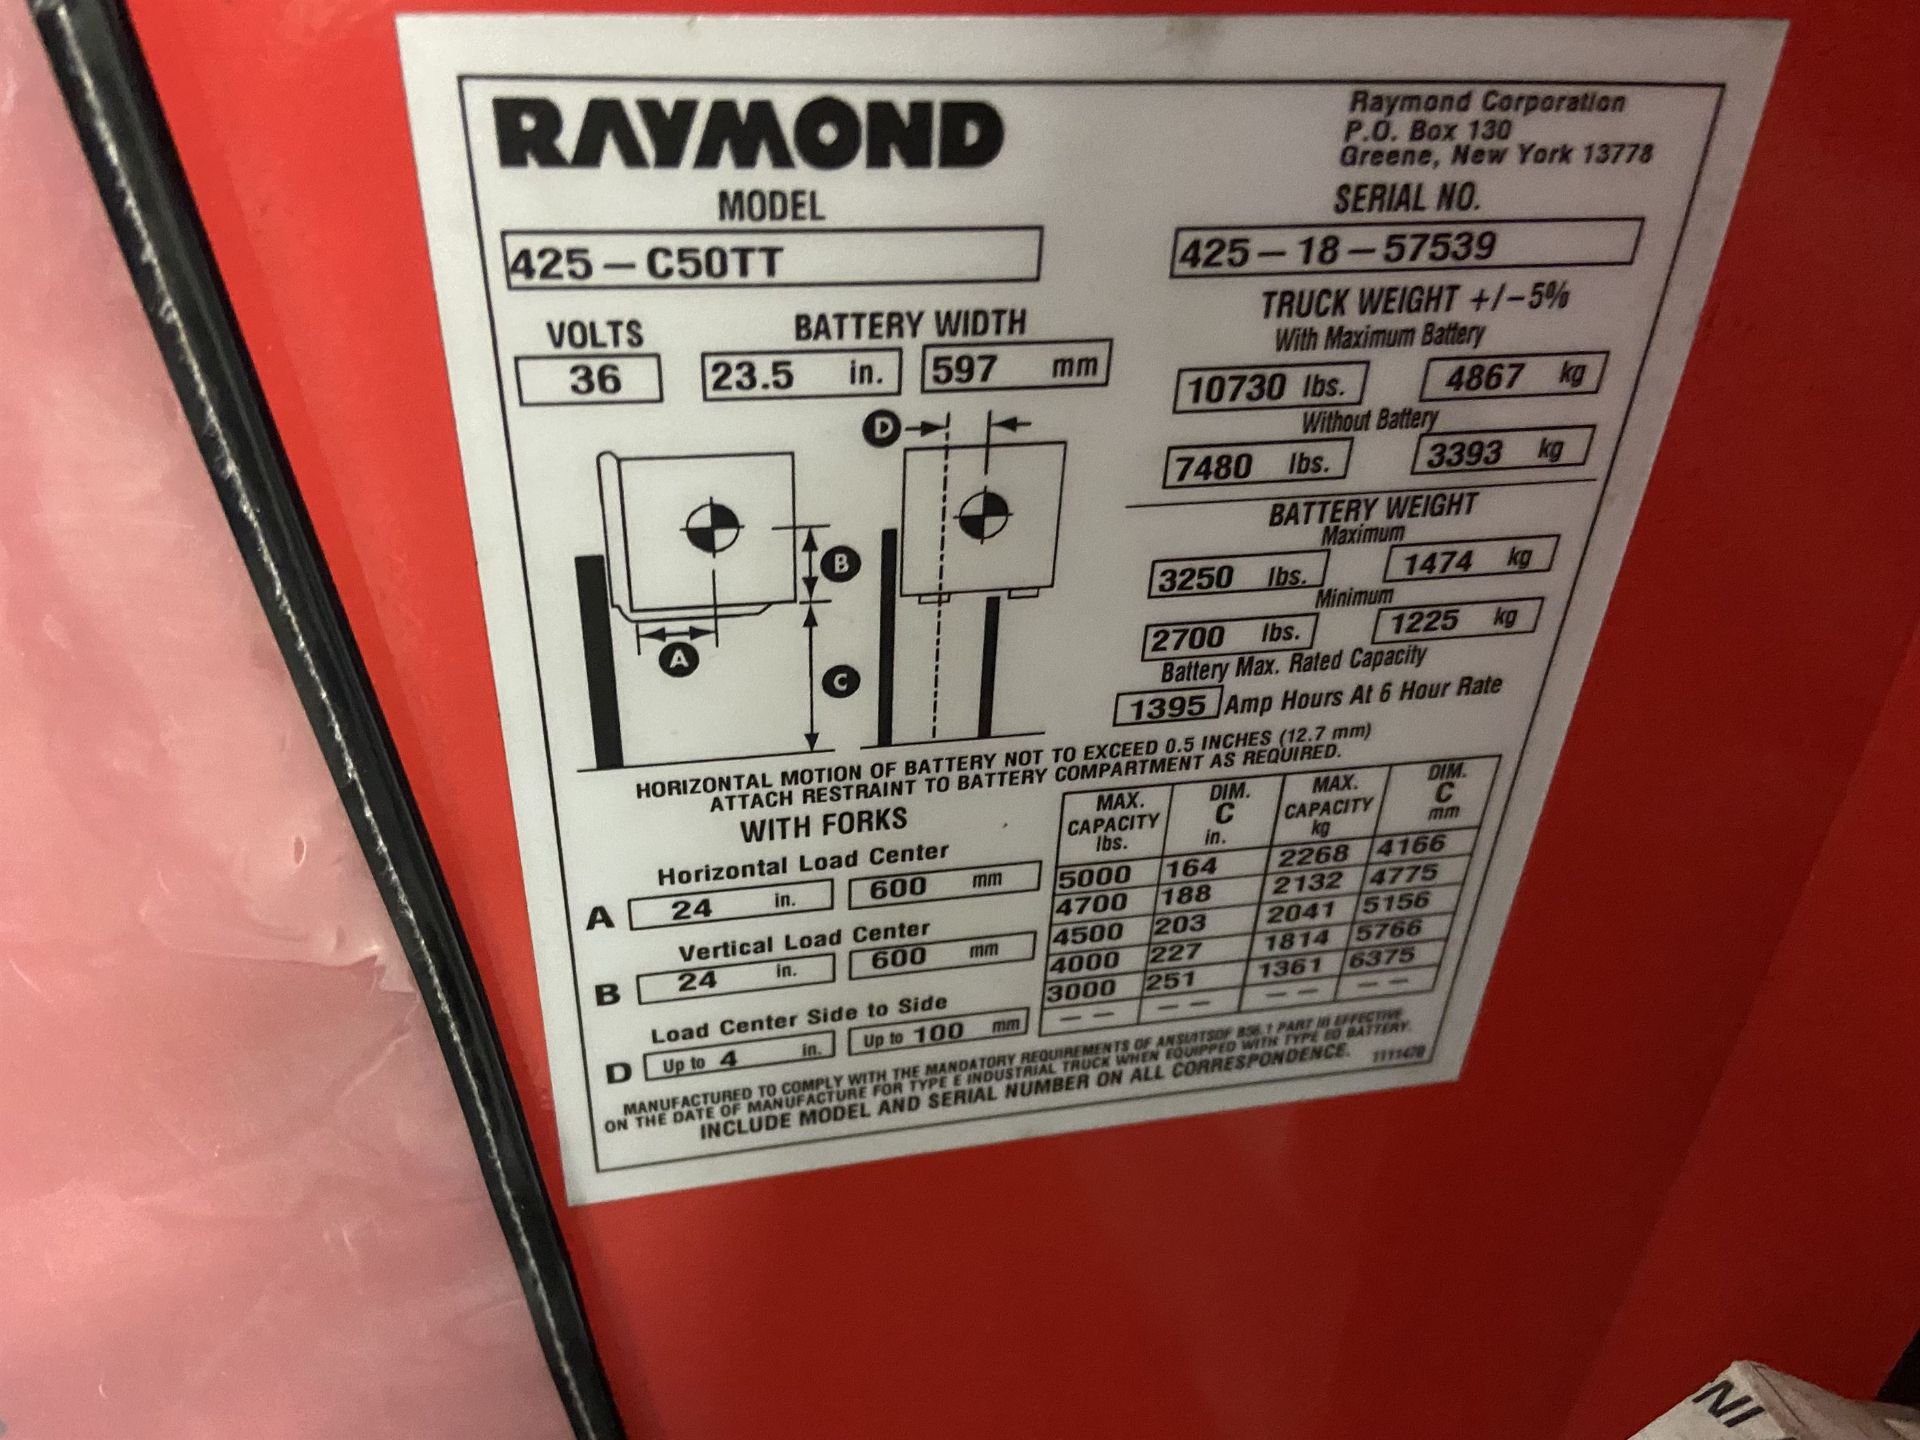 2018 RAYMOND 425-C50TT 5,000 lb Electric Stand Up Forklift, s/n 425-18-57539, w/ 36V Charger, 251" - Image 2 of 5